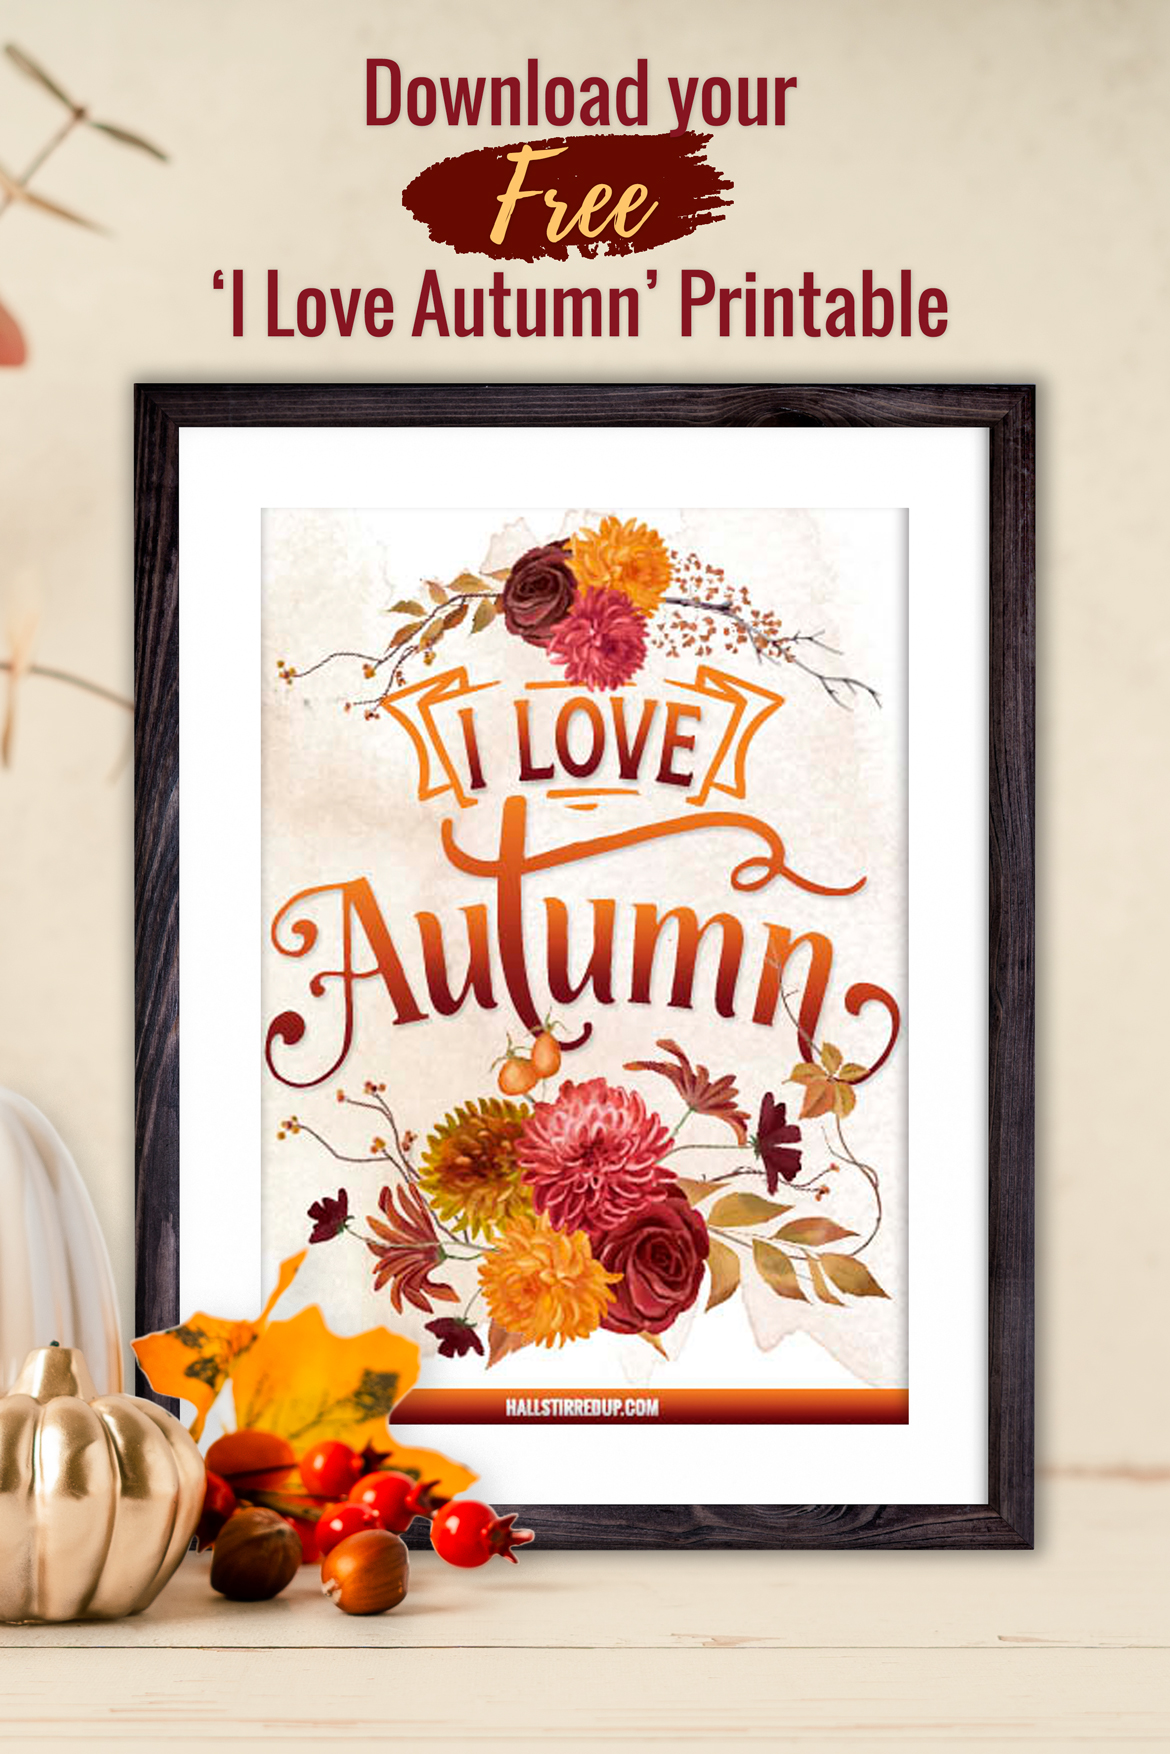 All the fall feels and a pretty 'I love Autumn' free printable!